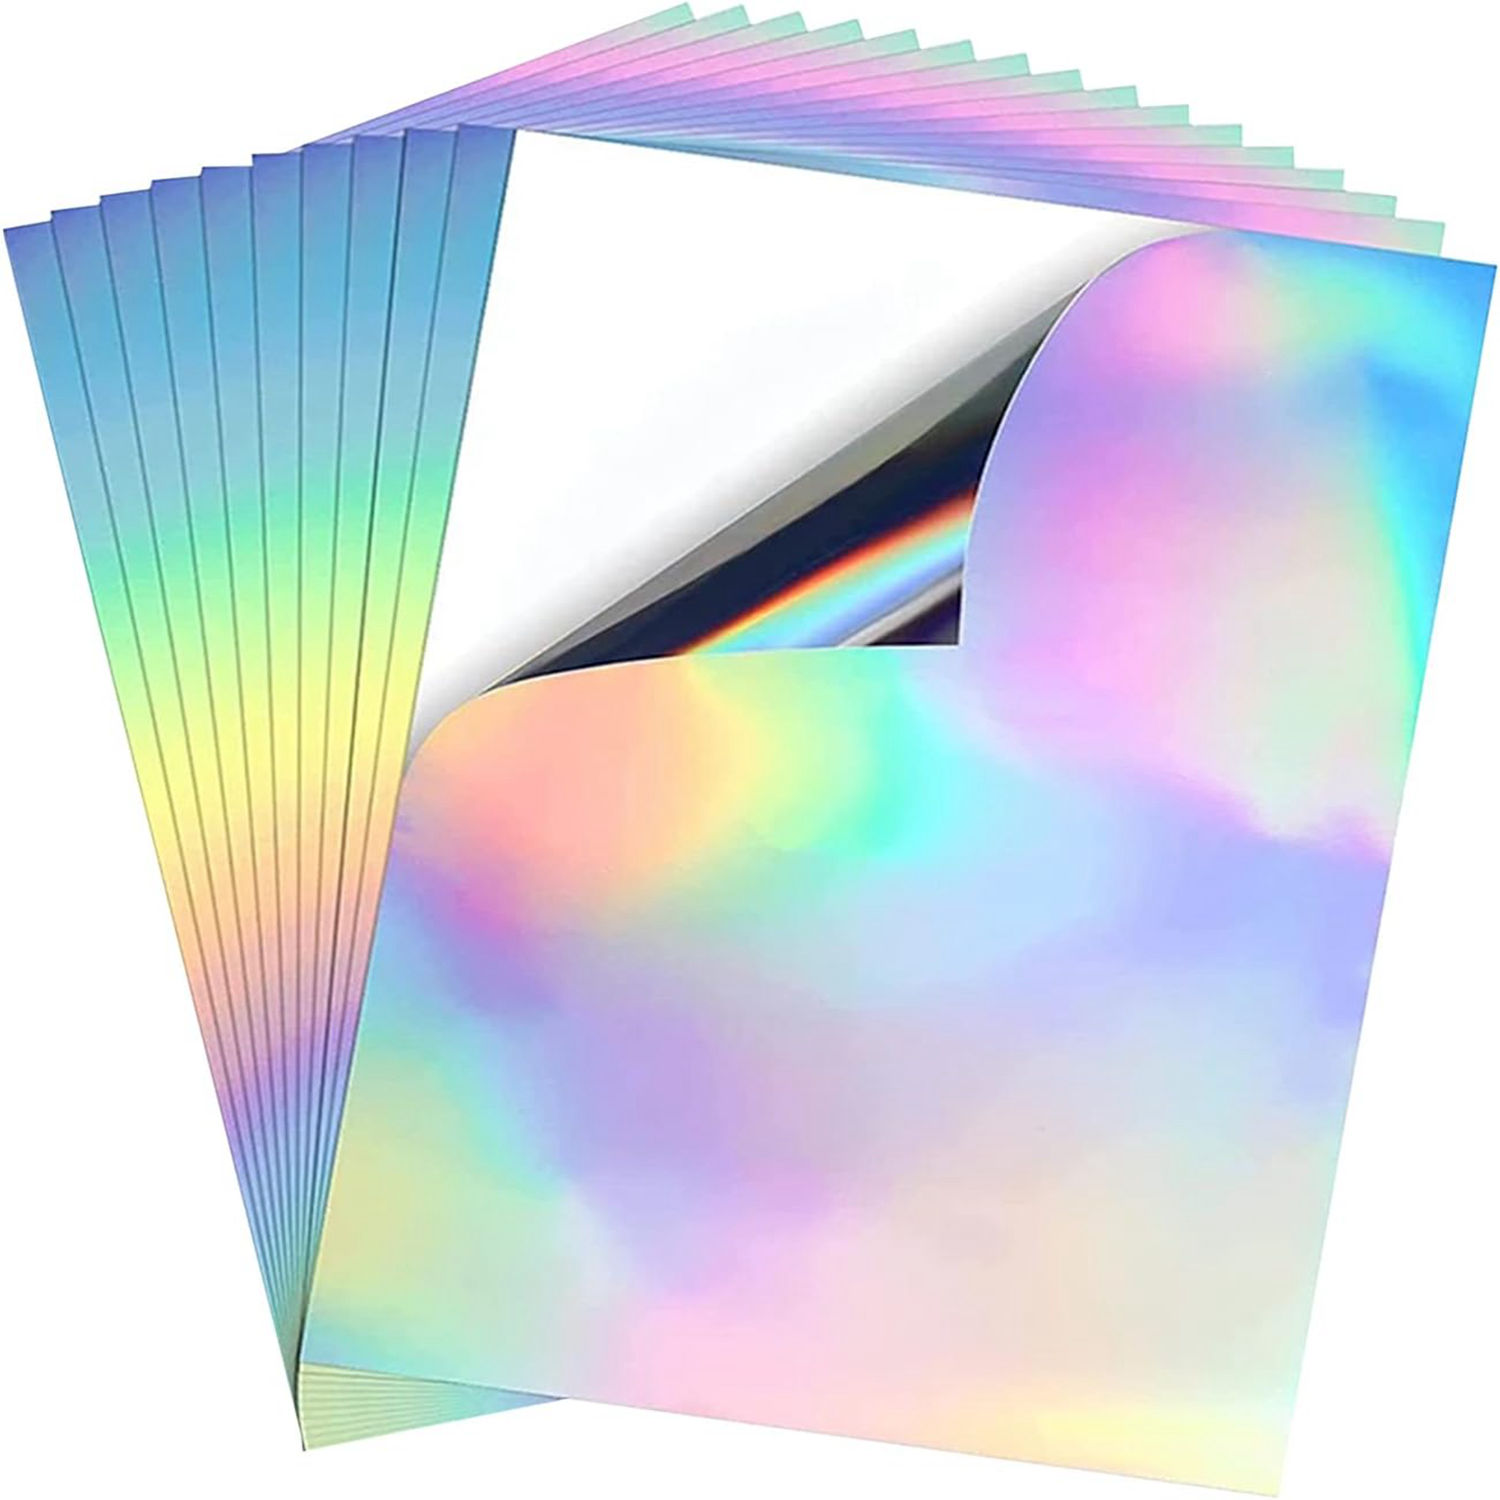 36 Sheets Holographic Sticker Paper Waterproof A4 Size Clear Vinyl Sticker  Sheets Self-Adhesive Rainbow Overlay Sheets with 4 Styles Mixed